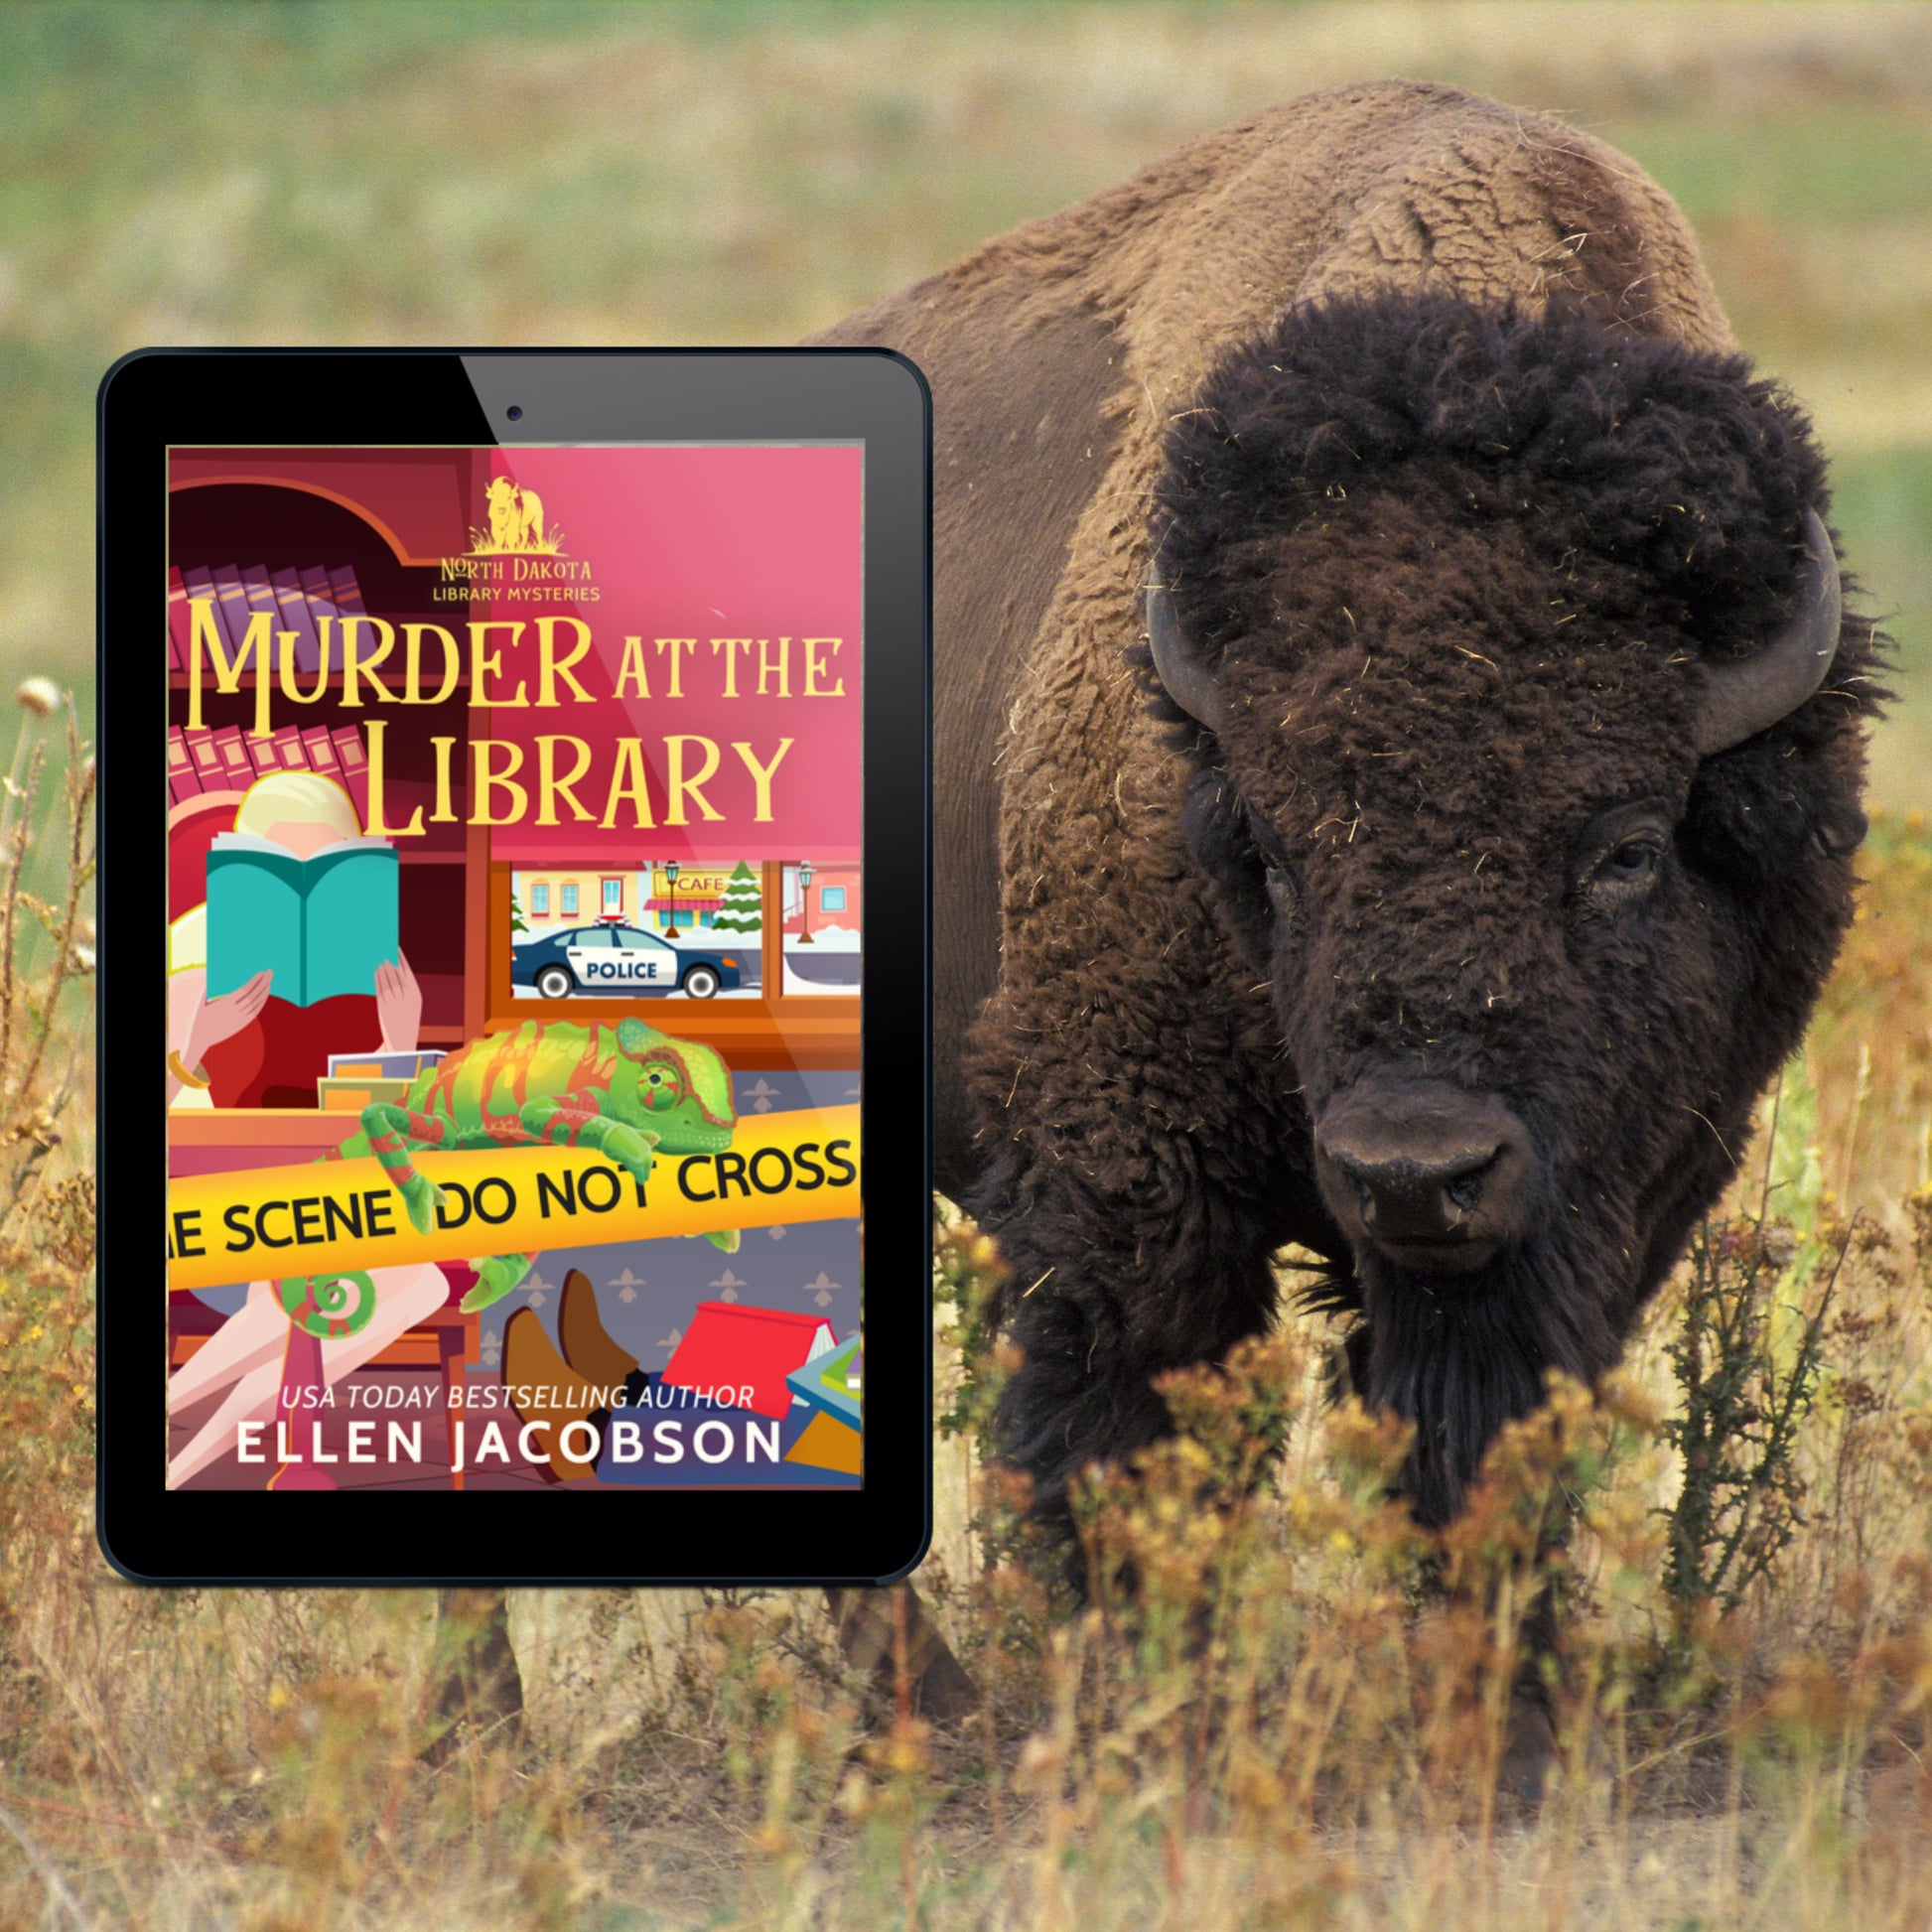 Murder at the Library eBook by Ellen Jacobson - EPUB Book